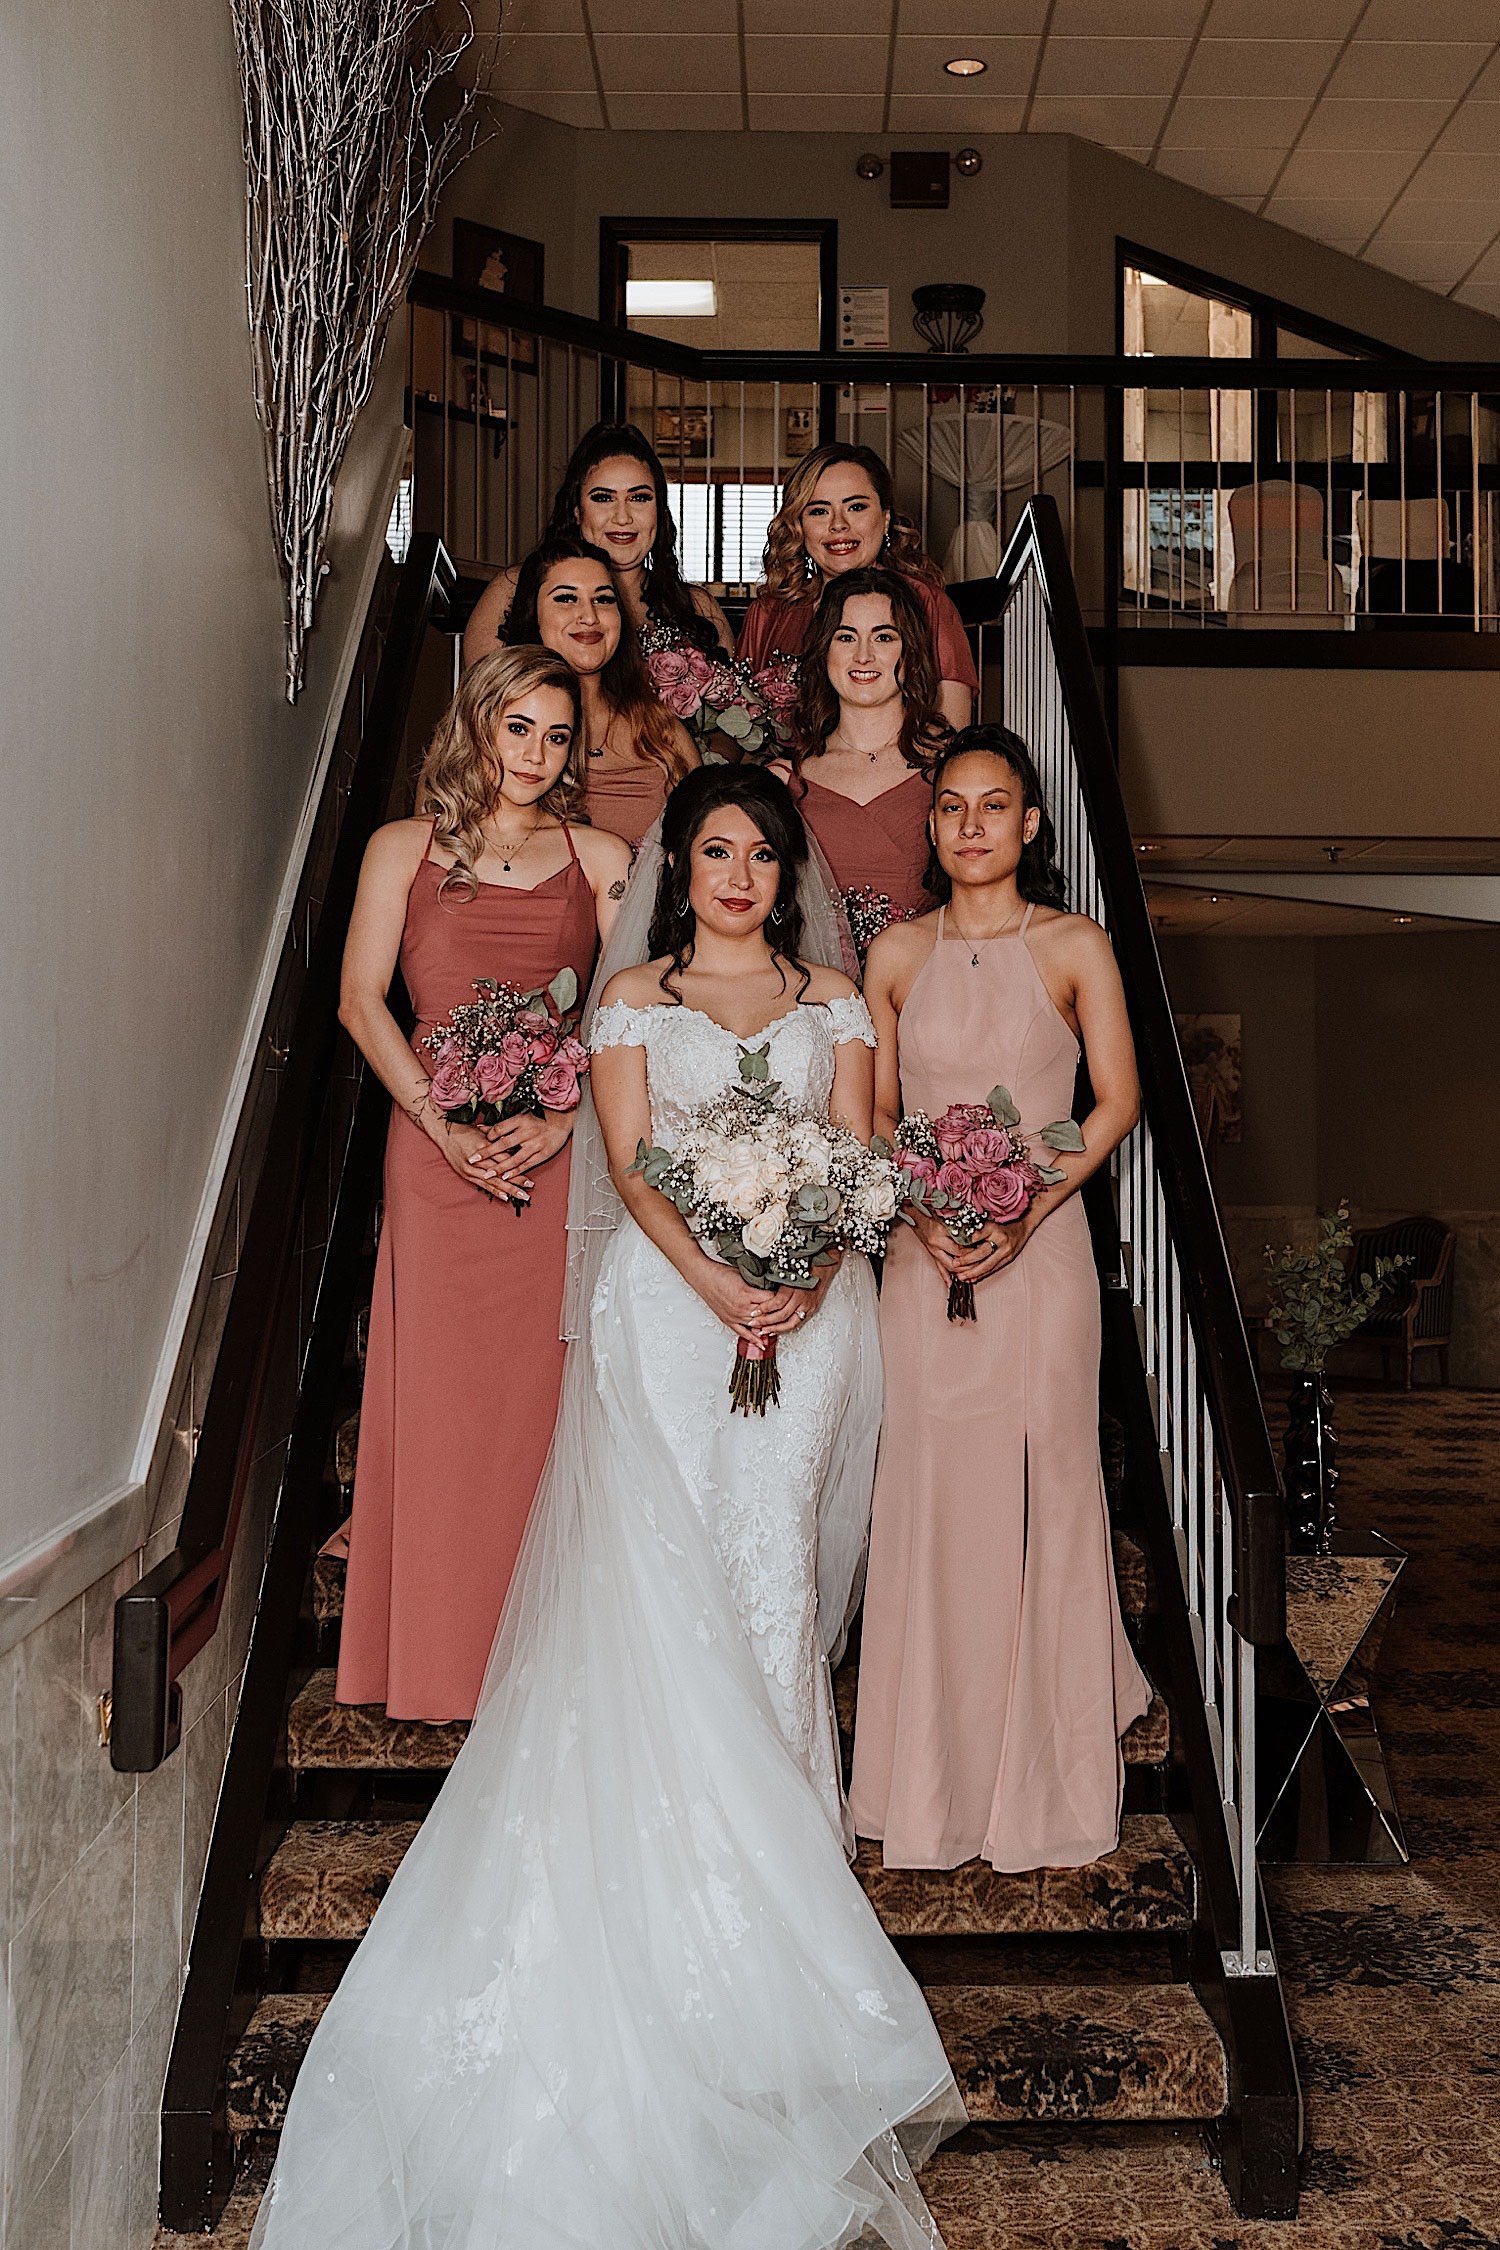 Bride poses with bridesmaids behind her on staircase prior to wedding